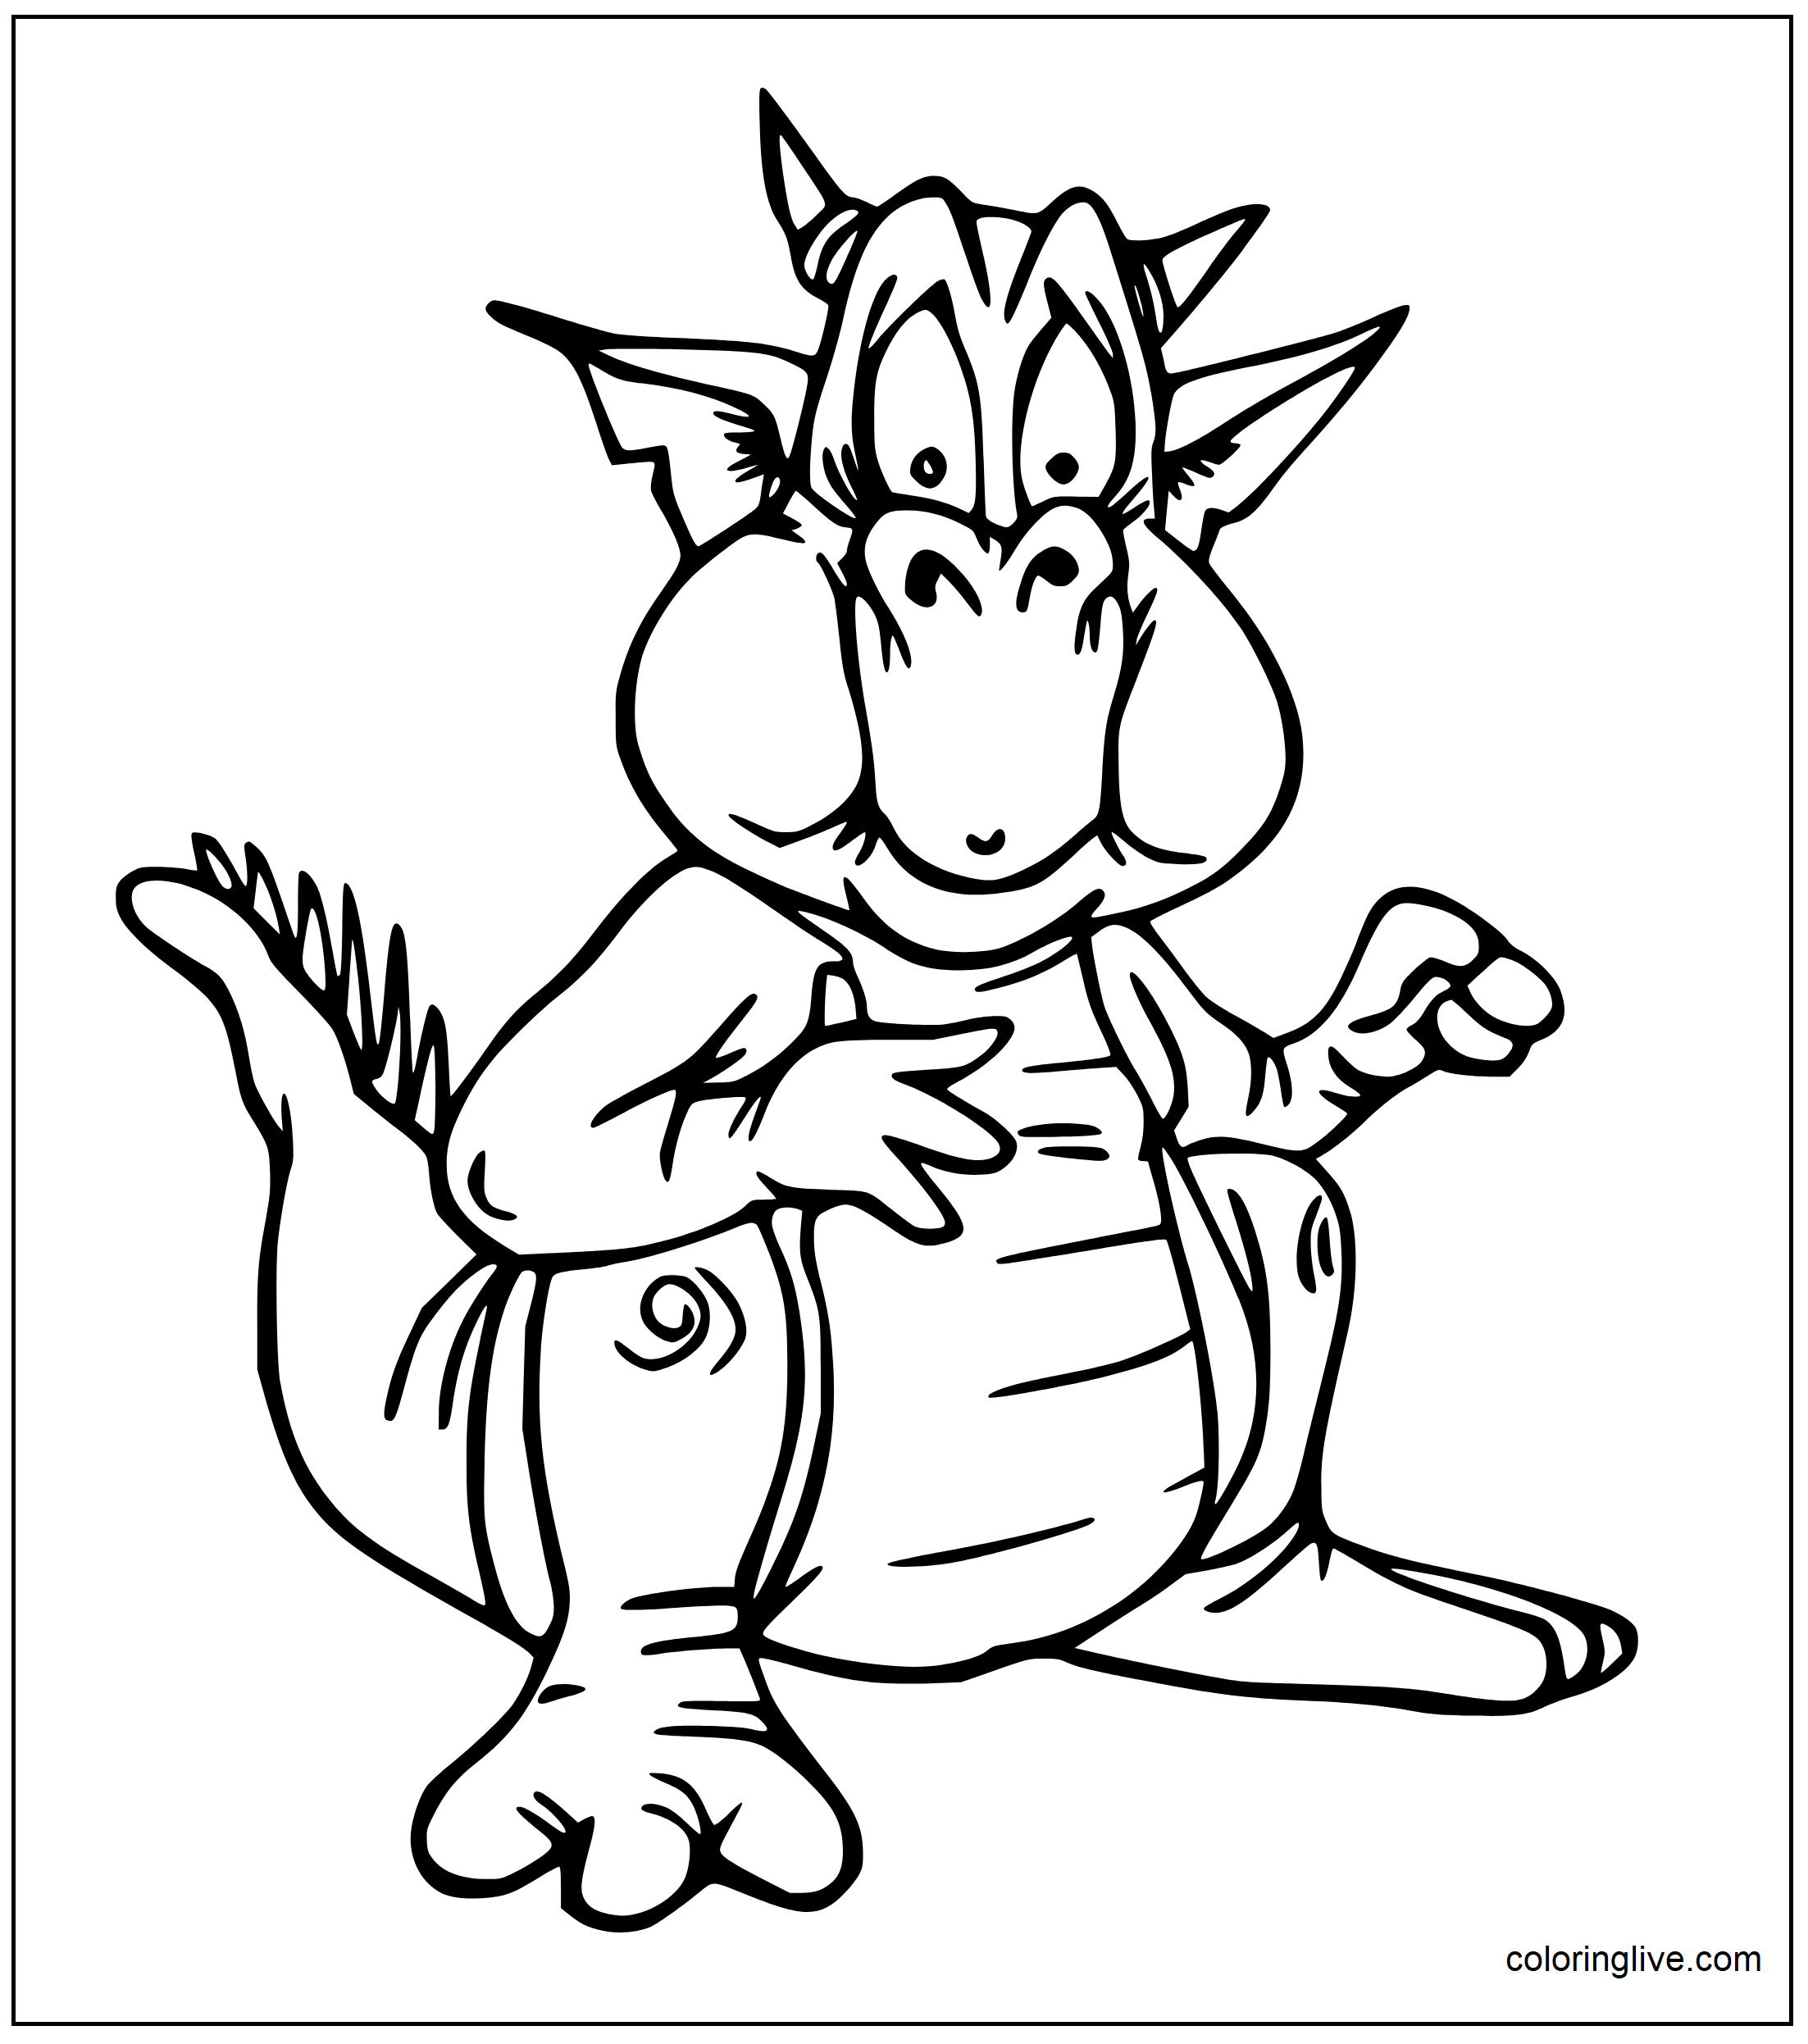 Printable Fat dragon  sheet Coloring Page for kids.